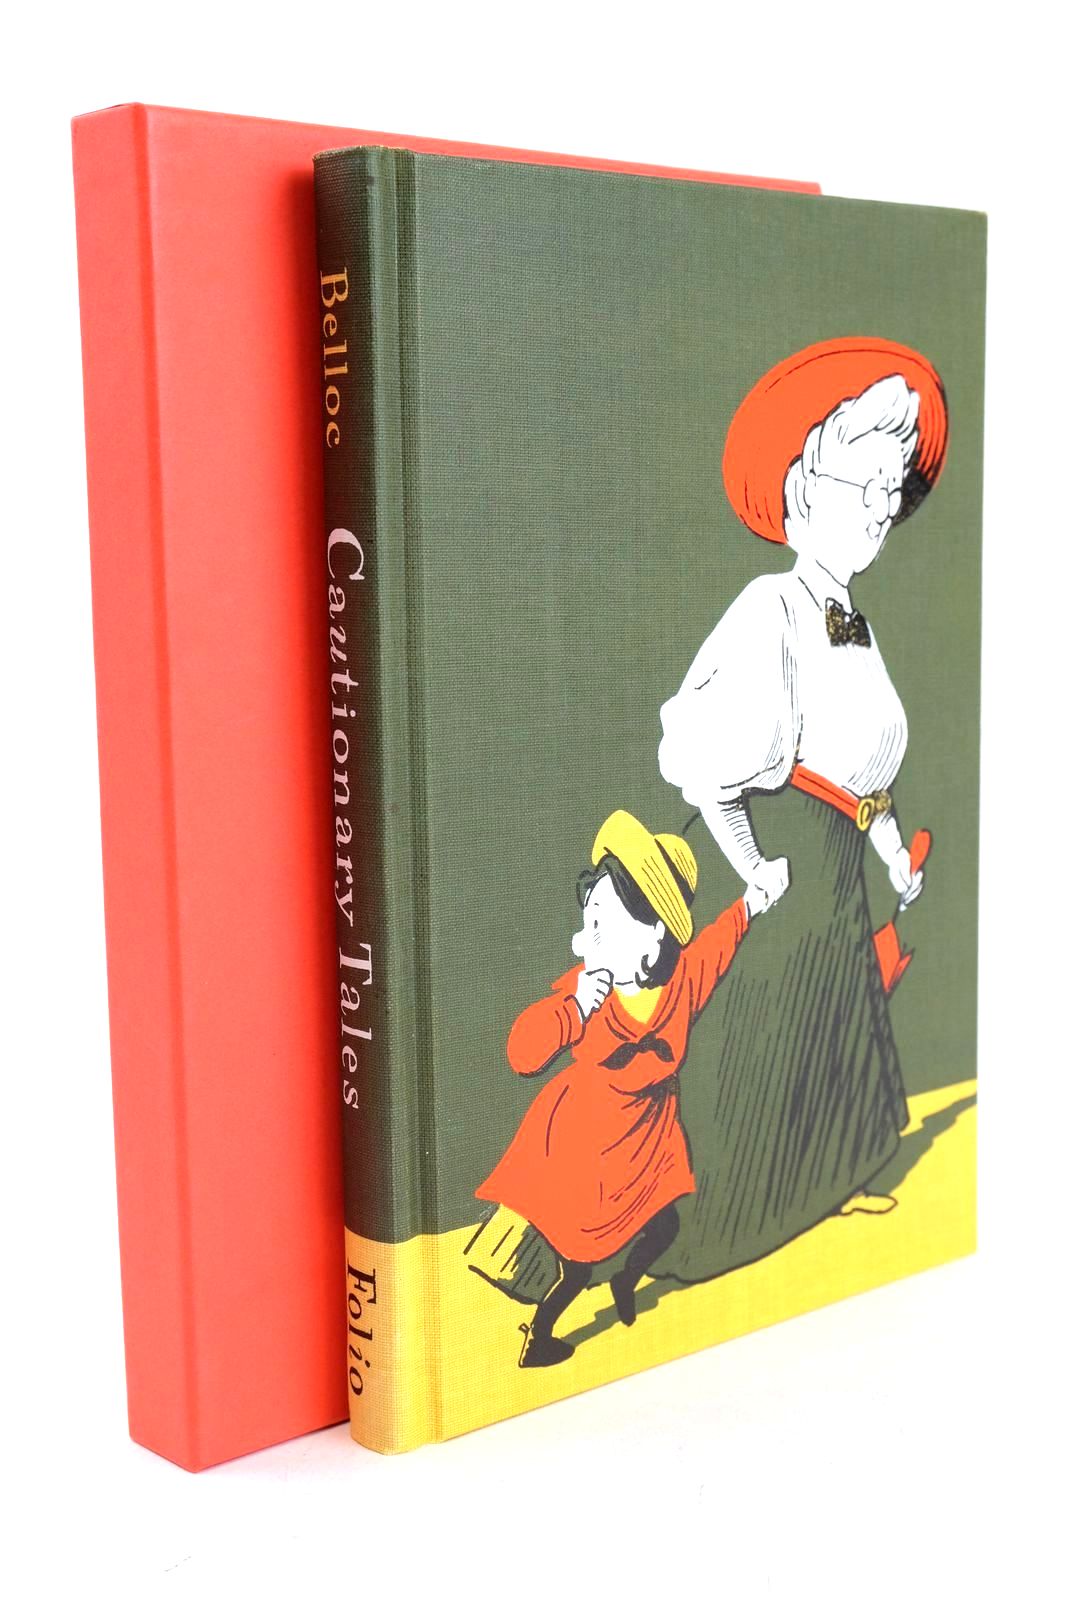 Photo of CAUTIONARY TALES AND OTHER VERSES written by Belloc, Hilaire illustrated by Simmonds, Posy published by Folio Society (STOCK CODE: 1326760)  for sale by Stella & Rose's Books